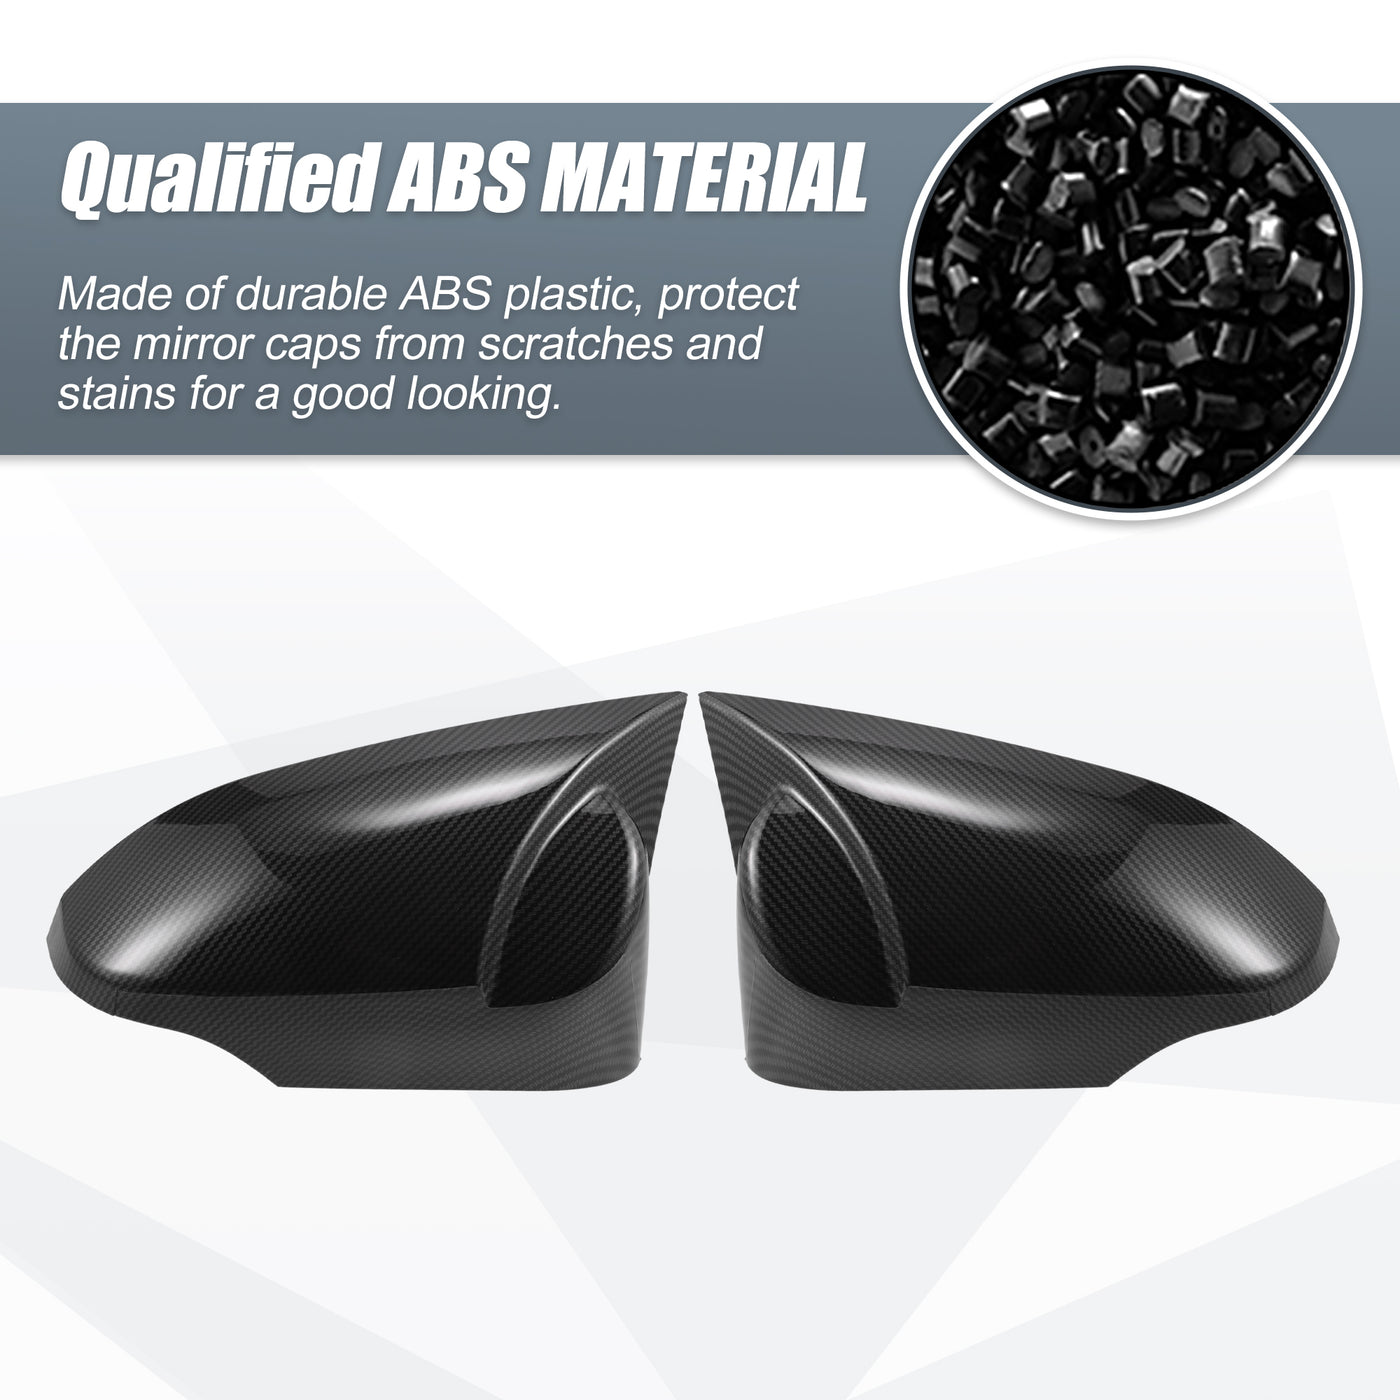 X AUTOHAUX Pair Car Rear View Driver Passenger Side Mirror Cover Cap Overlay Black Carbon Fiber Pattern for Toyota Camry Venza Avalon Corolla Yaris Mirror Guard Covers Exterior Decoration